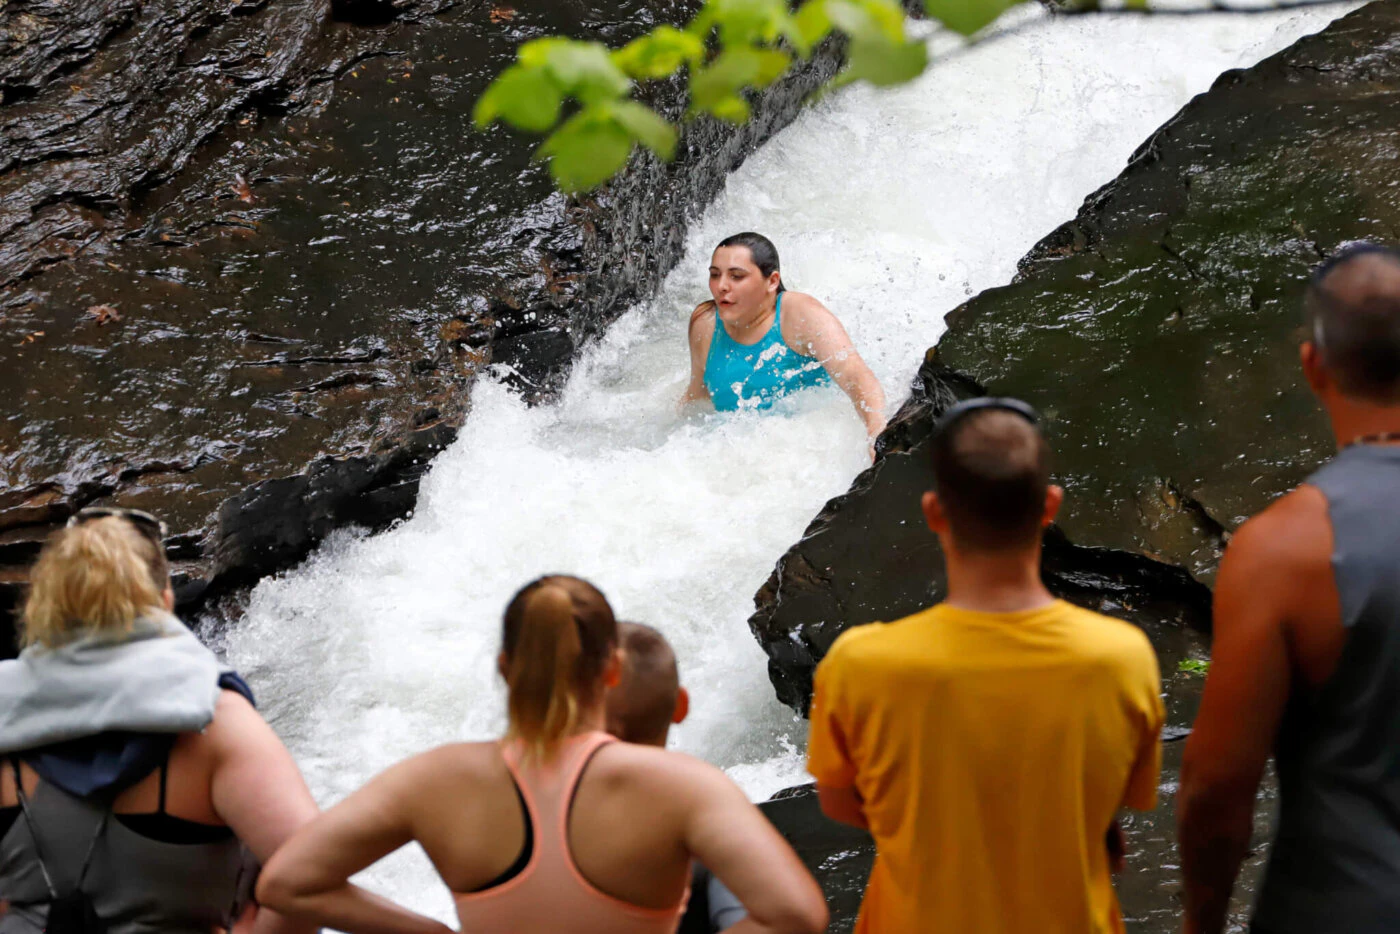 A visitor to Ohiopyle State Park in Ohiopyle, Pa. enjoys the natural waterslide at Meadow Run Sunday, May 24, 2020. (AP Photo/Gene J. Puskar)